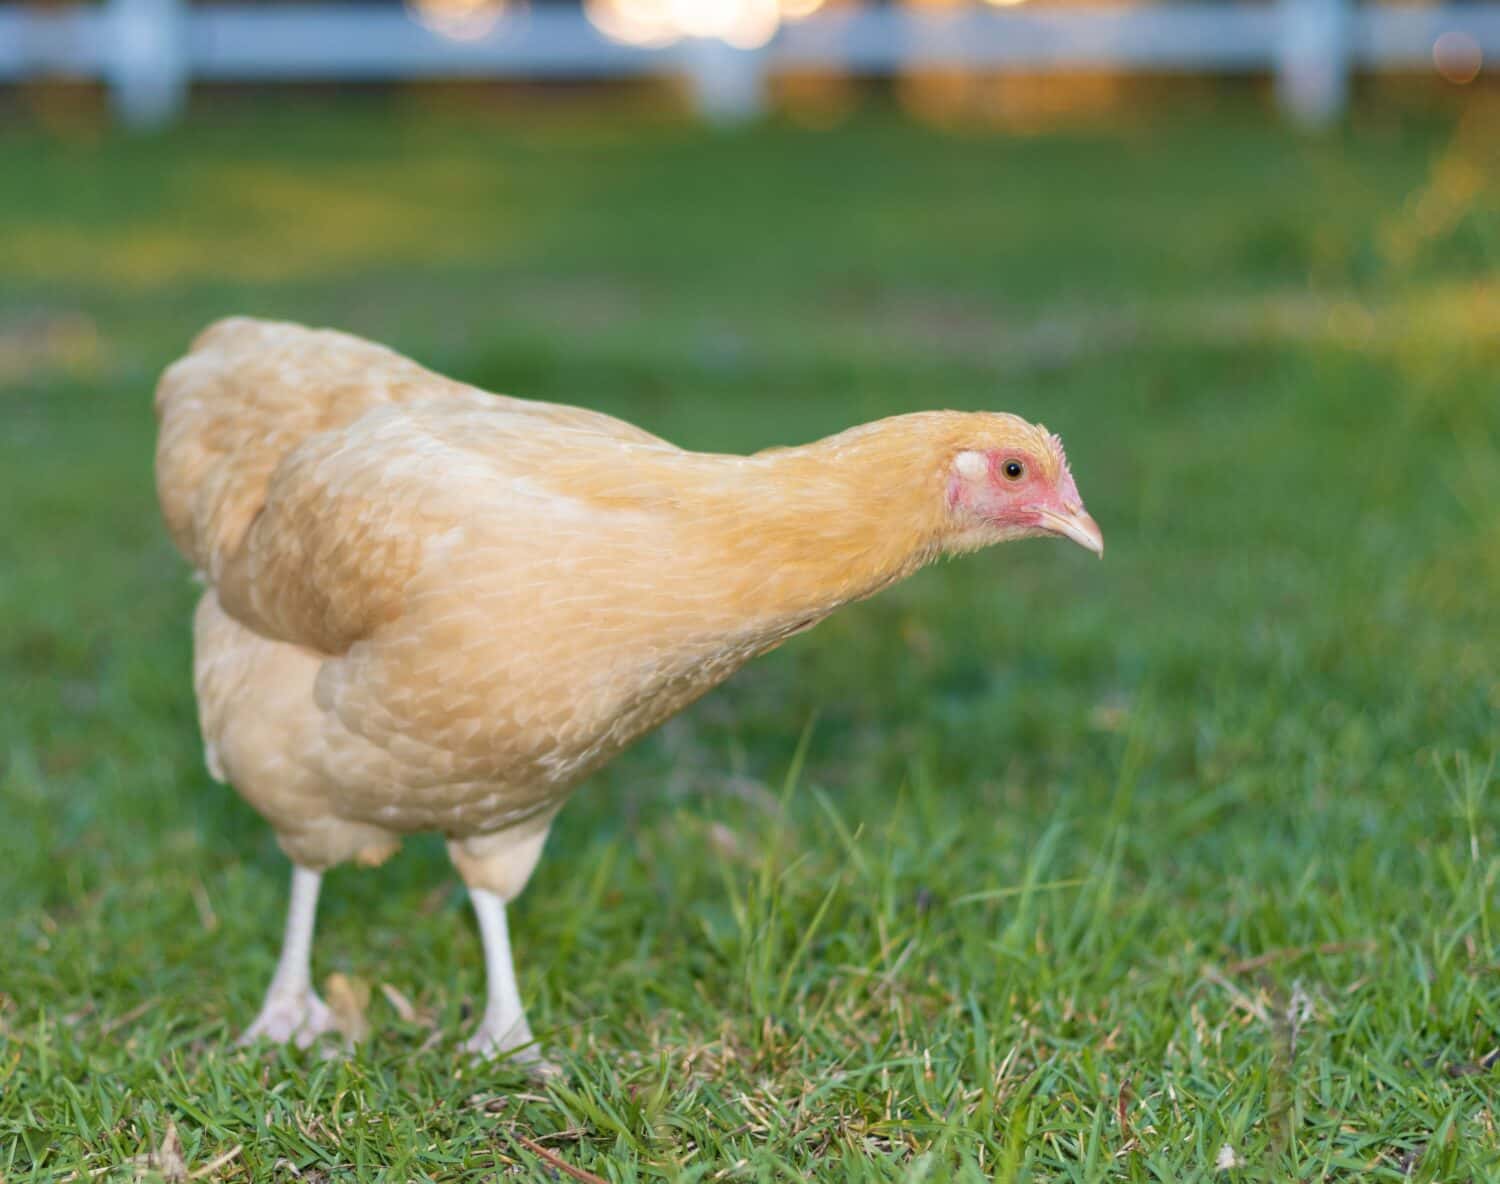 Young chicken hen that is yellow and orange colored that is on a grassy field in North Carolina.